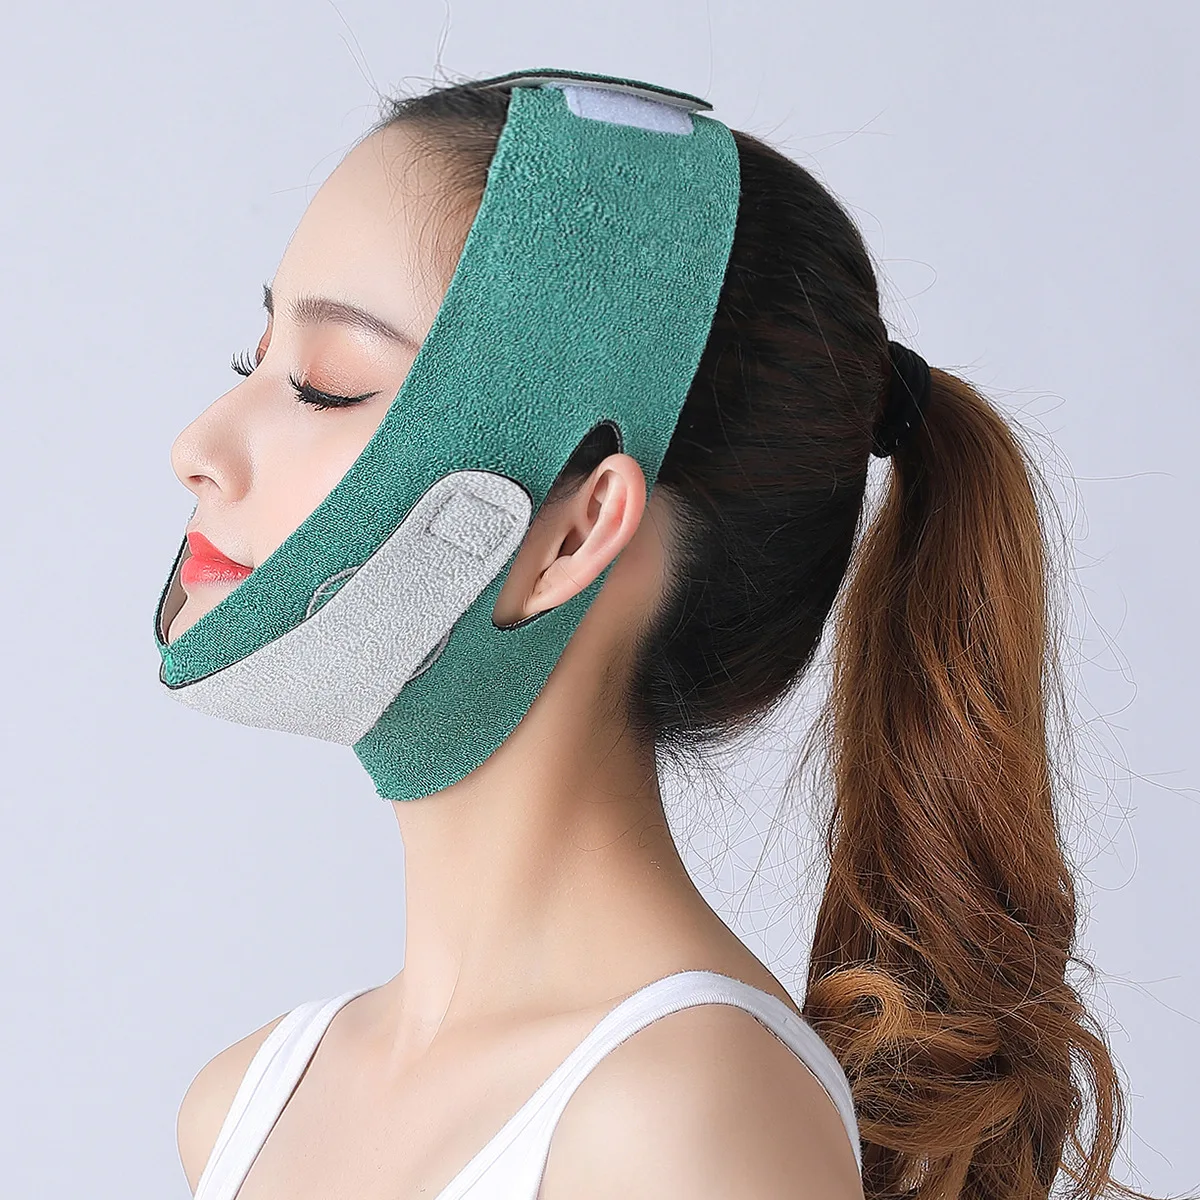 breathable double chin lifting pain free